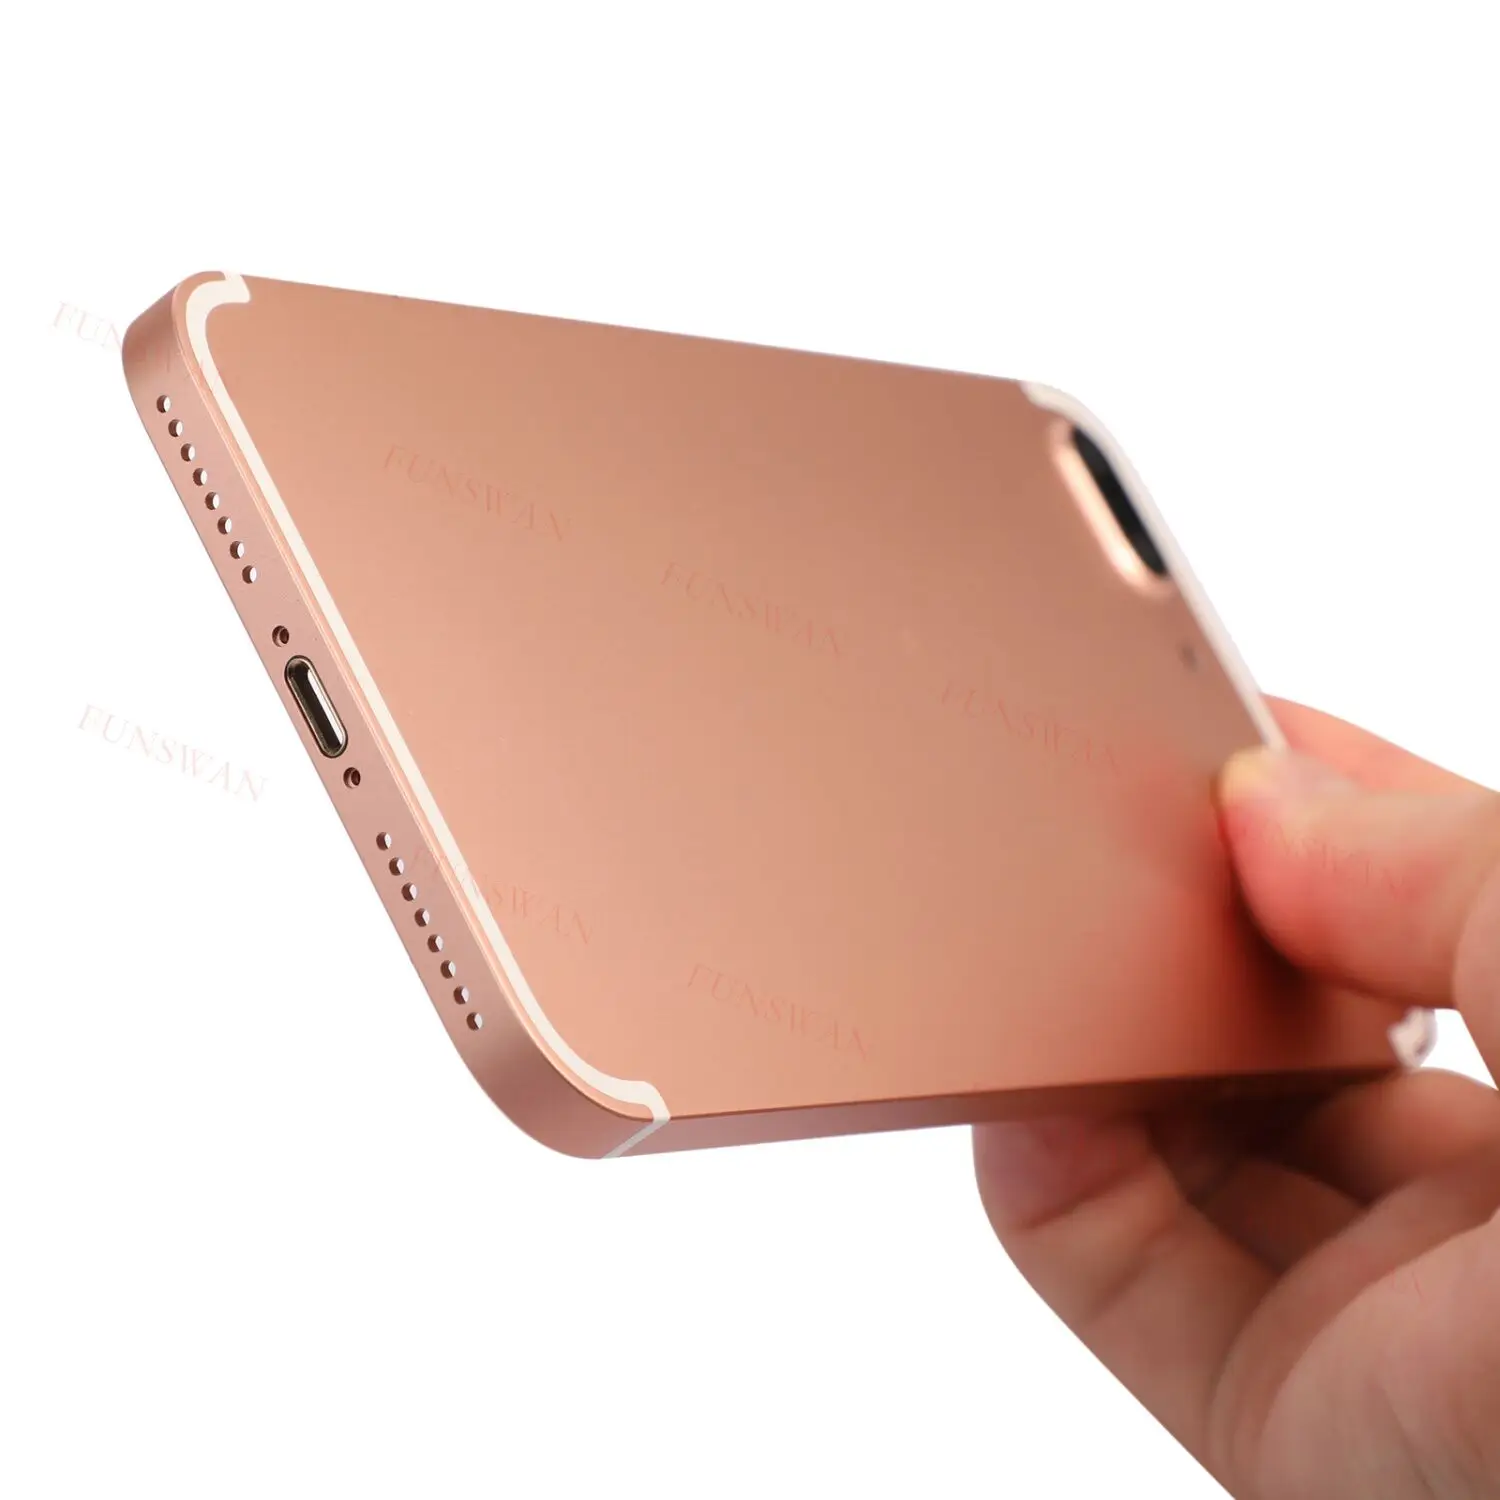 New Housing For iPhone 7 Plus Like iPhone 12 Series High Quality DIY Housing,Custom iPhone 7 Plus with Square Edges Like 12